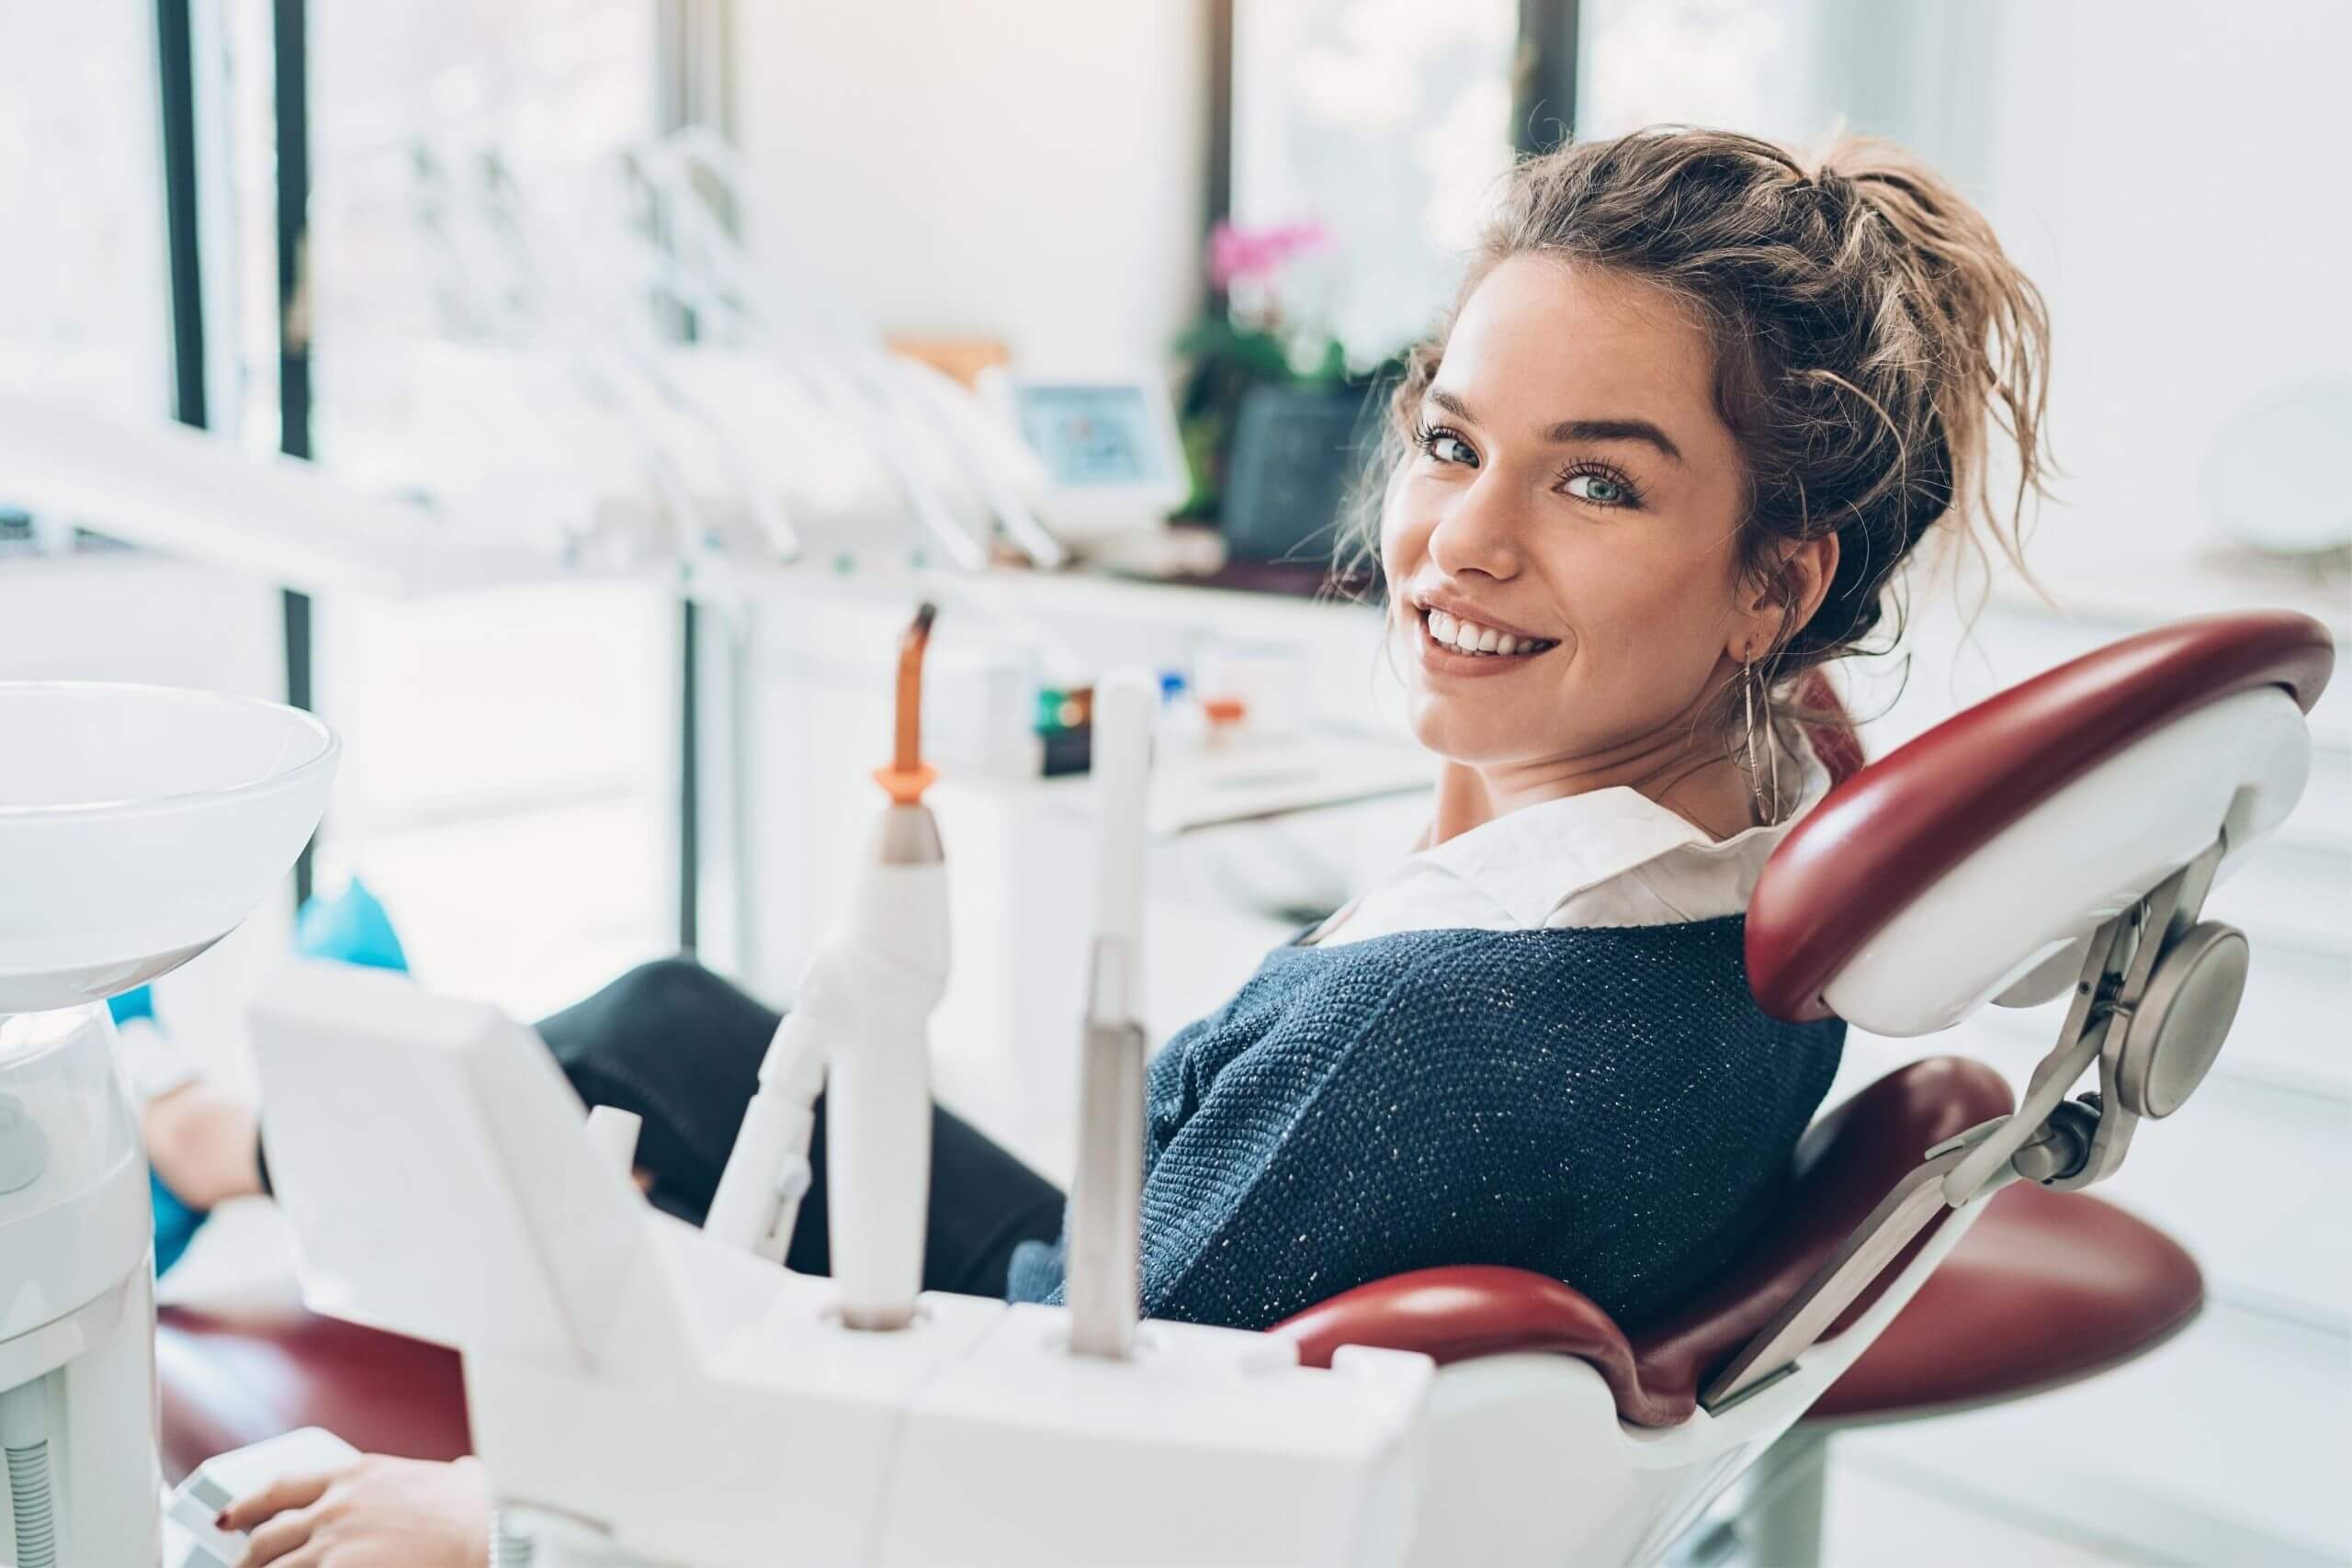 A woman in a dentist chair smiling